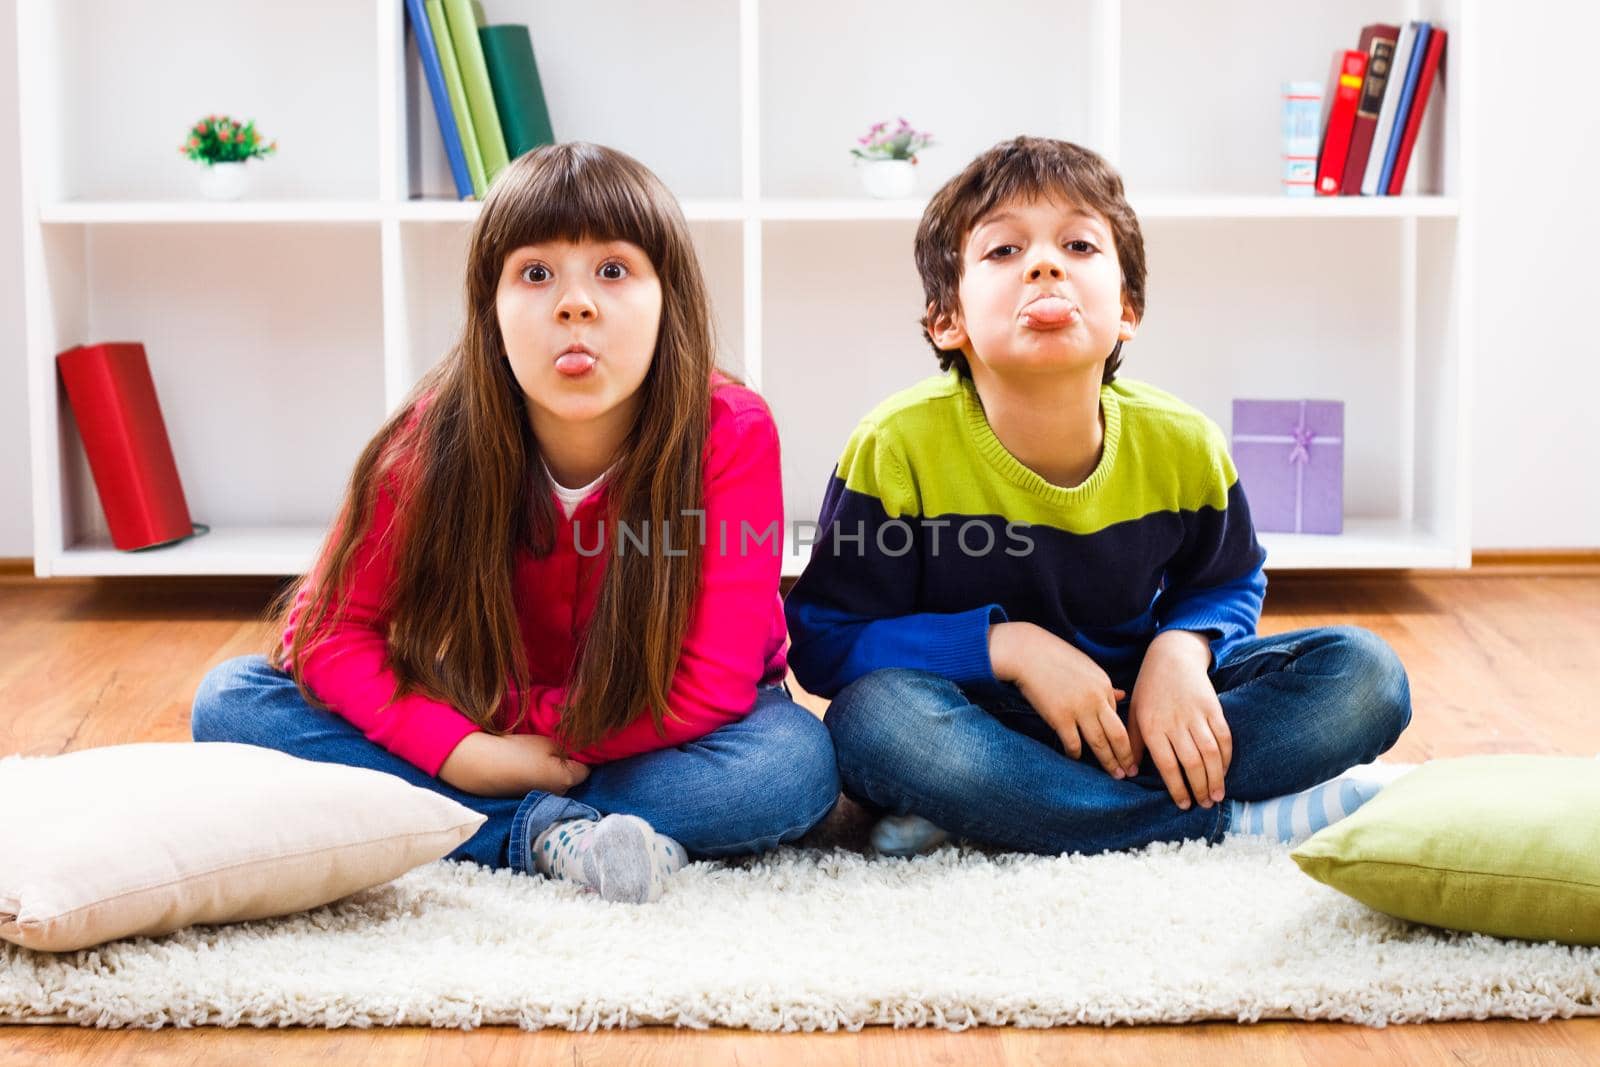 Image of children sticking out tongue.